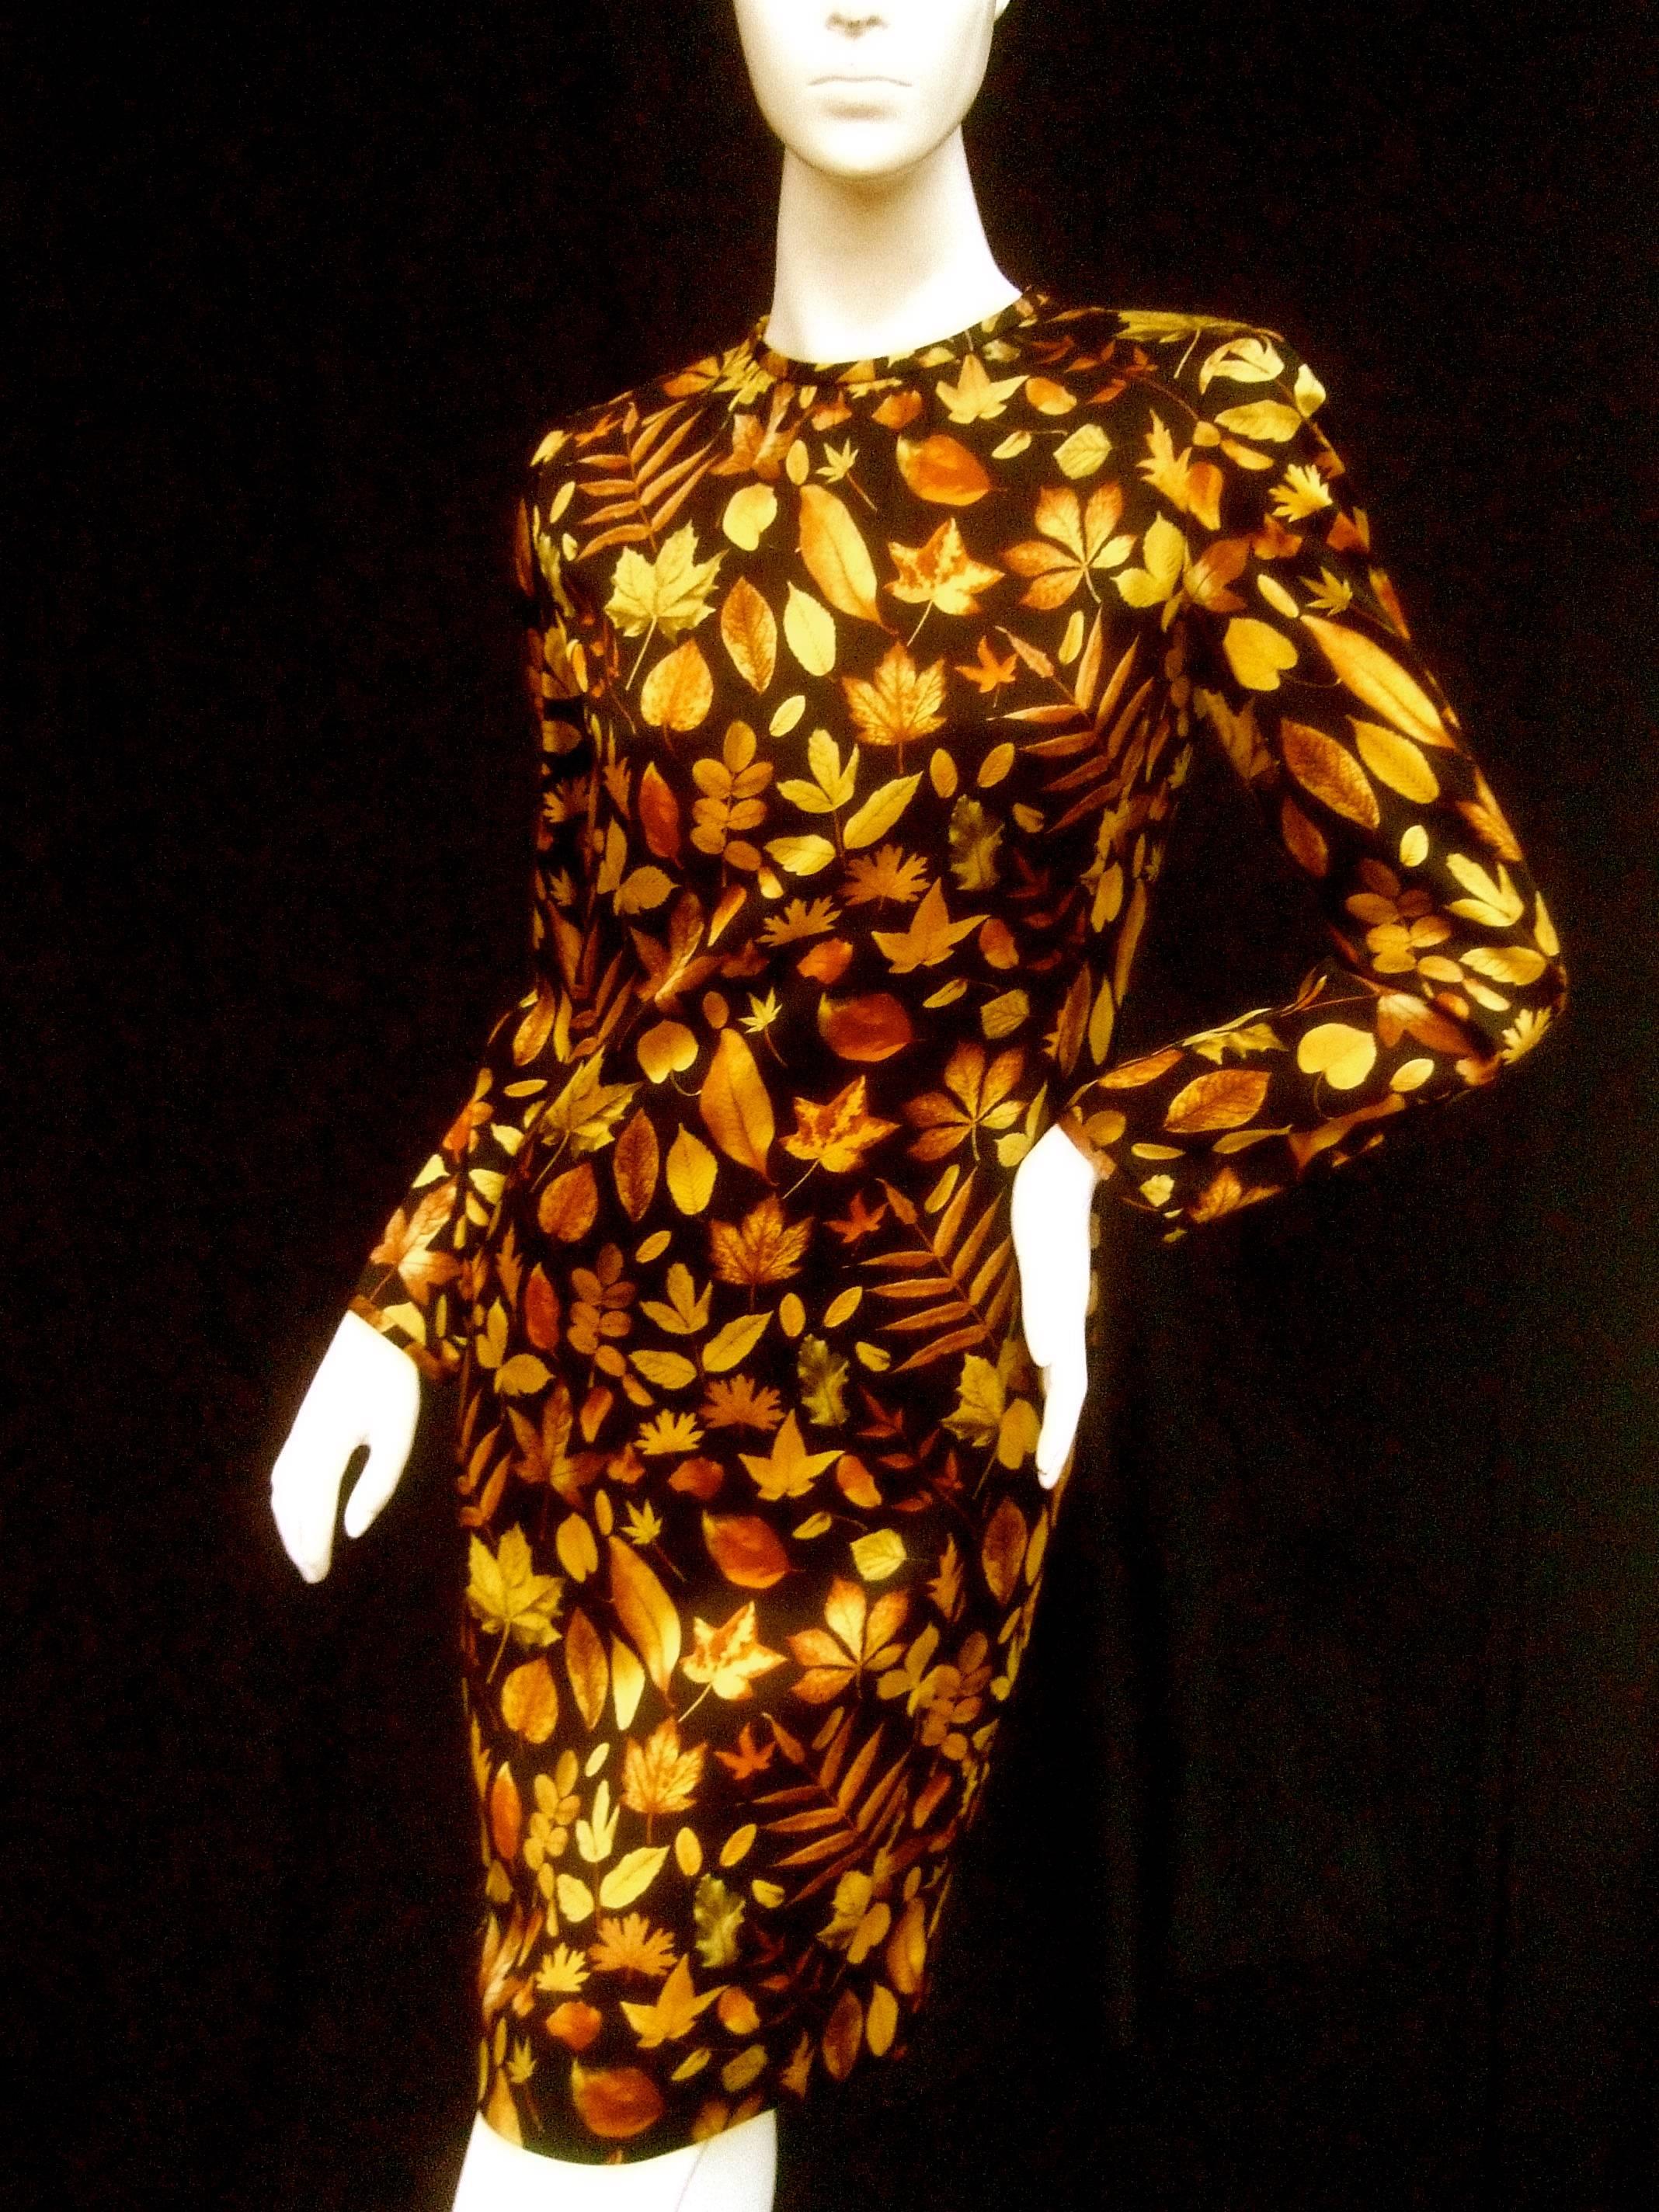 Neiman Marcus Silk autumn leaf print tunic dress c 1990
The luxurious silk dress is illustrated with a collection
of golden brown autumn leaves of various types

The collection of leaves are illuminated against 
a solid black silk background

Makes